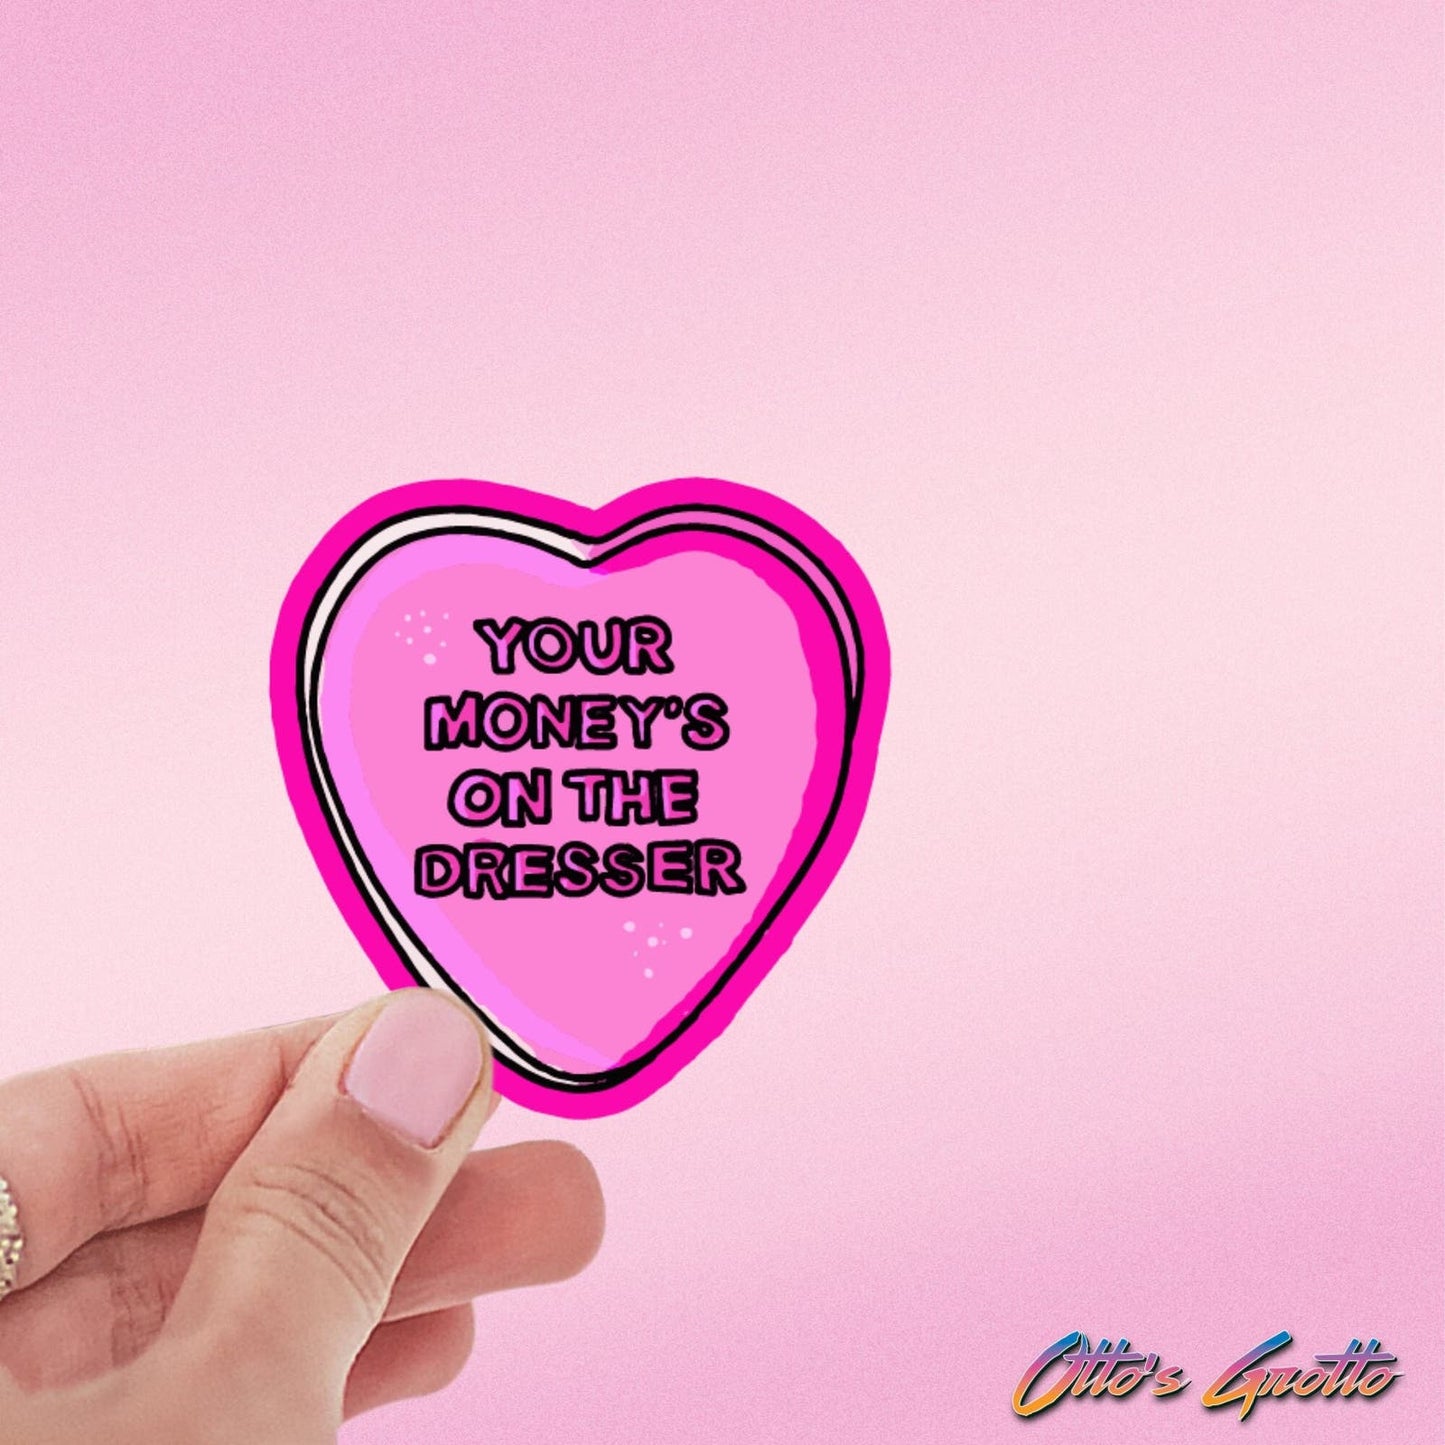 Your Money's On The Dresser Pink Candy Heart Sticker